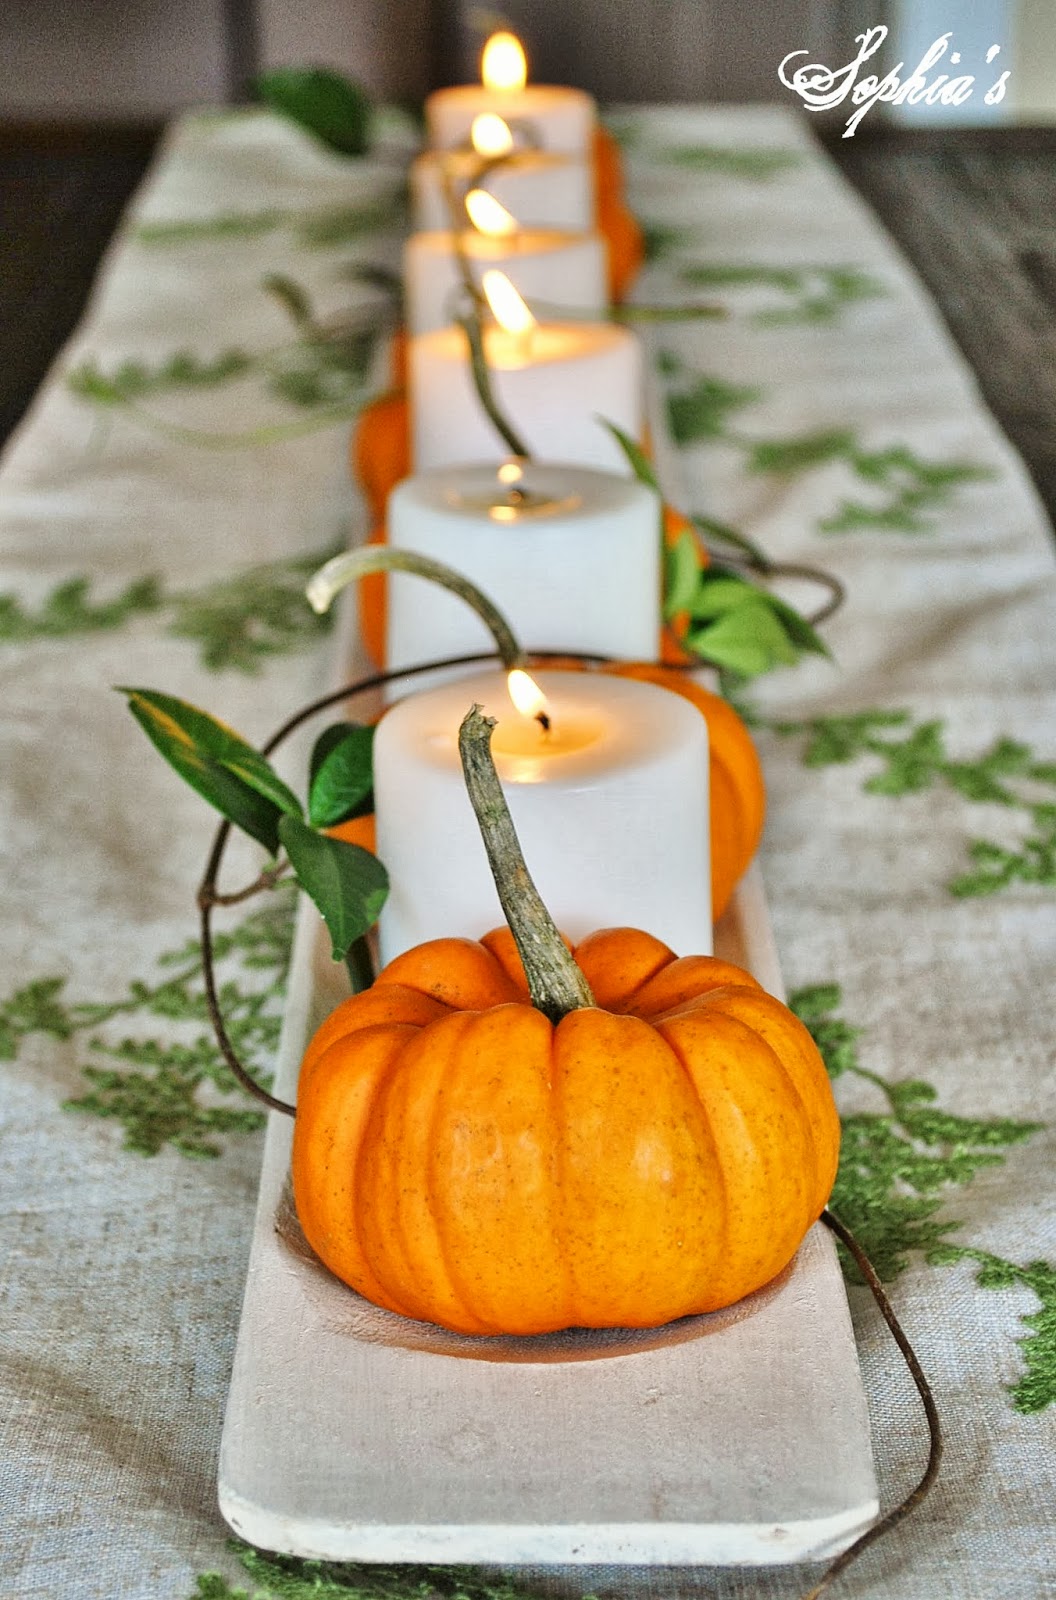 Sophia's: Fall in the Dining Room... 5 Easy Fall Centerpieces